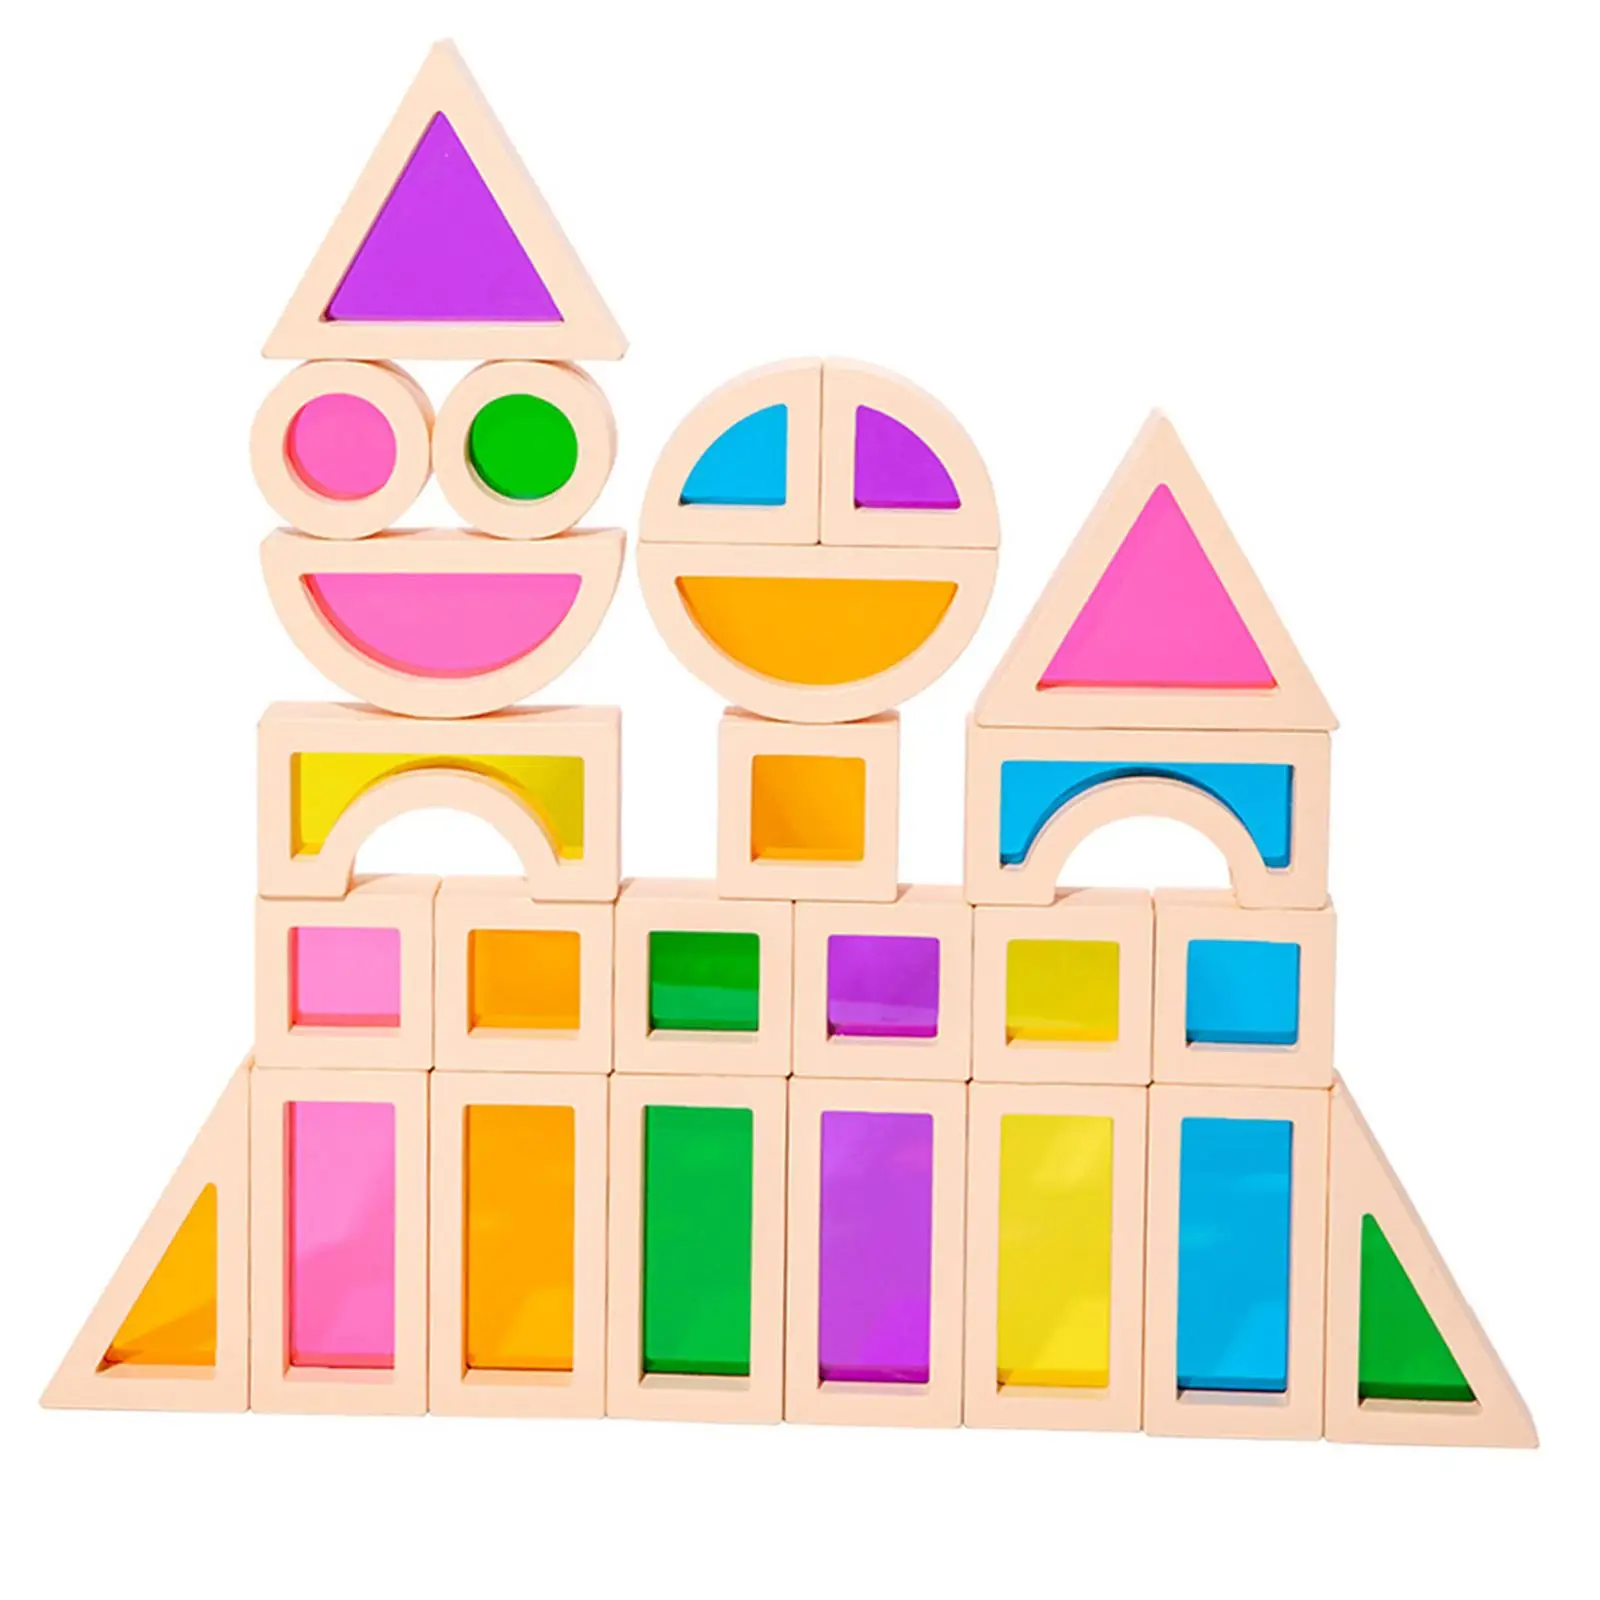 25 Pieces Stacking Building Blocks Educational Toys Toddlers Developmental Toys Colors Shapes Early Learning for Preschool